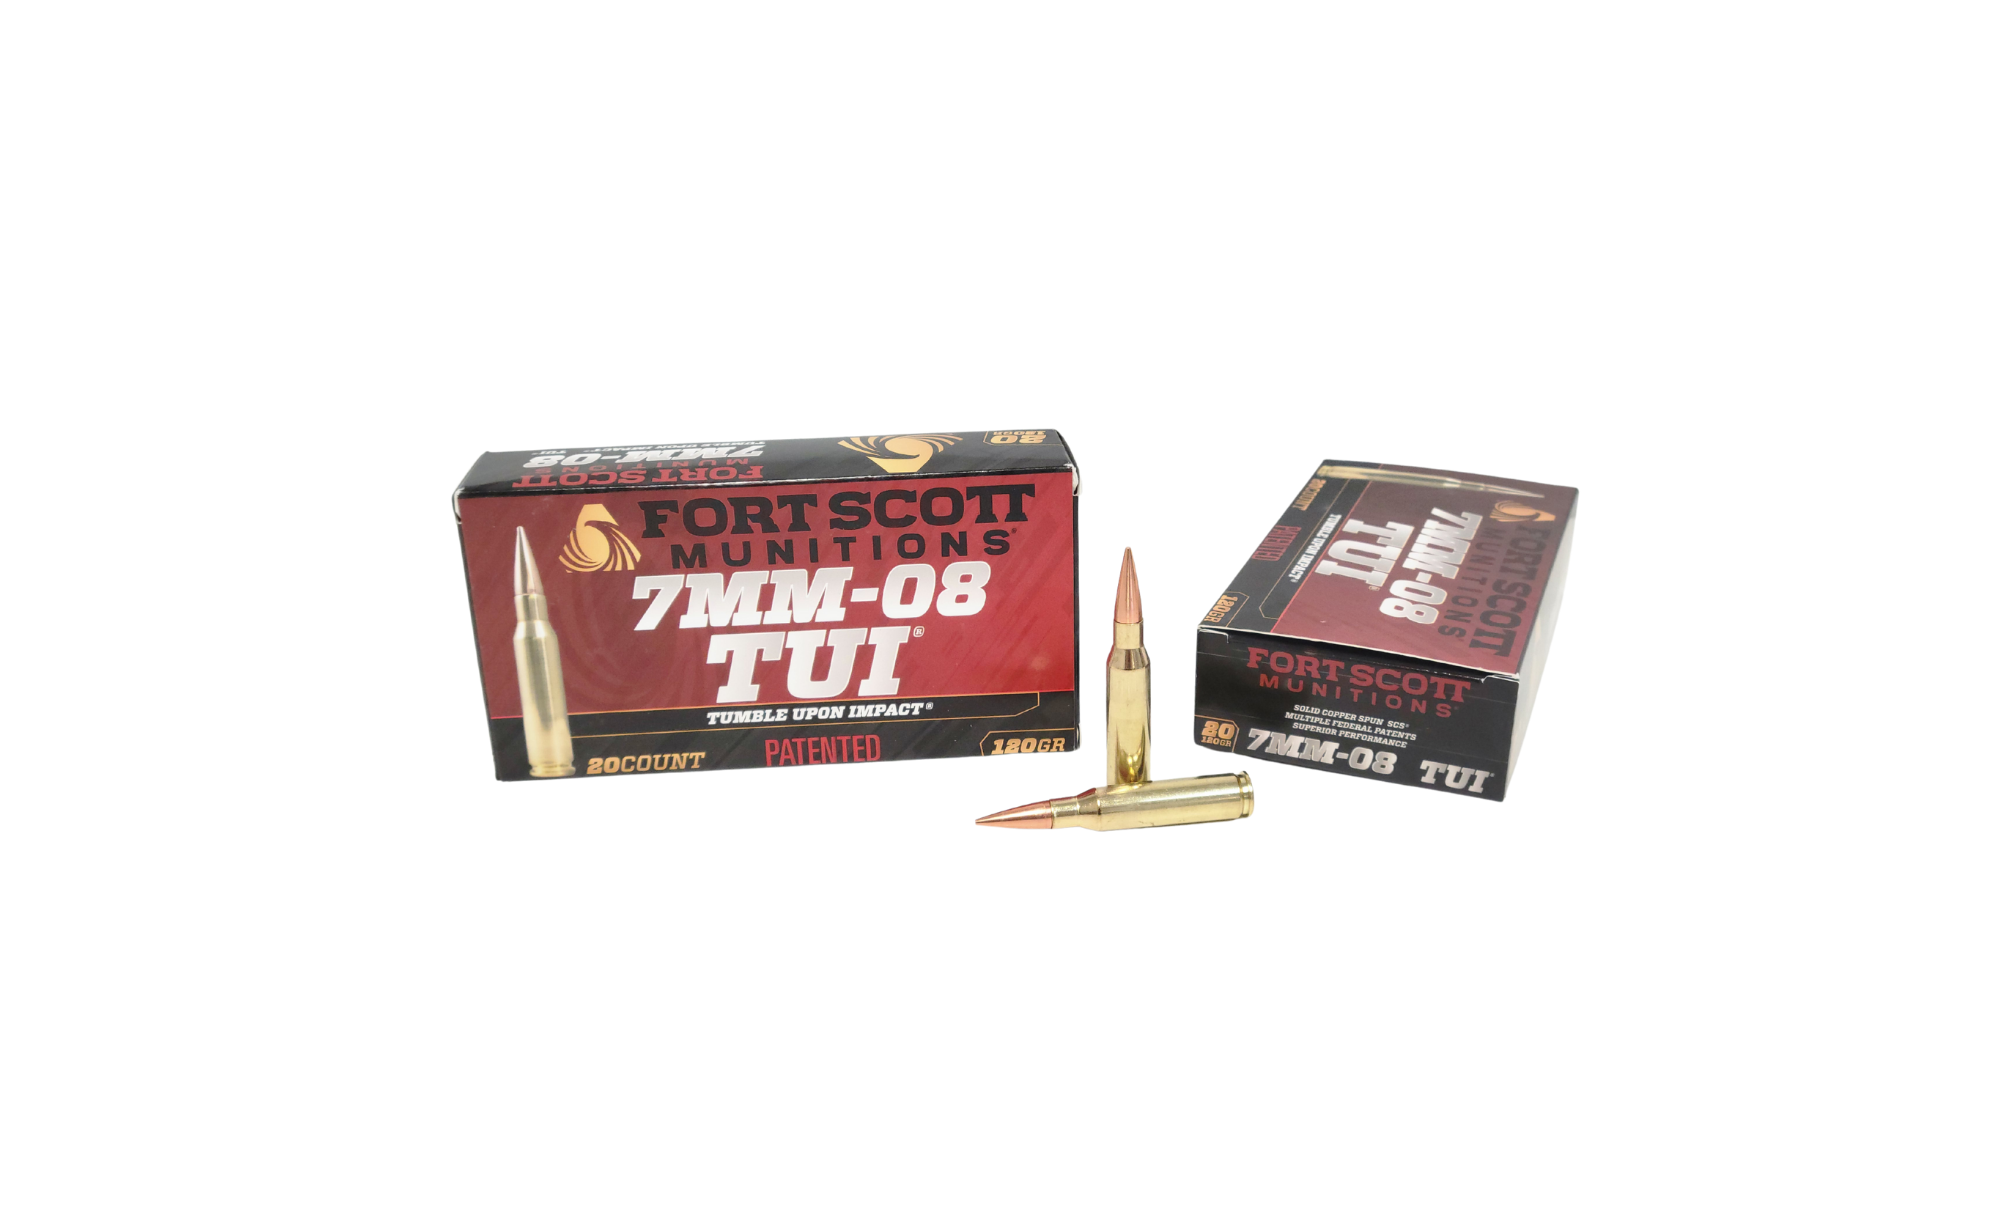 Fort Scott 7mm-08 Match SAME DAY SHIPPING 120 Grain lead-free TUI – 20 Rounds (Box) [NO TAX outside Texas] Product Image